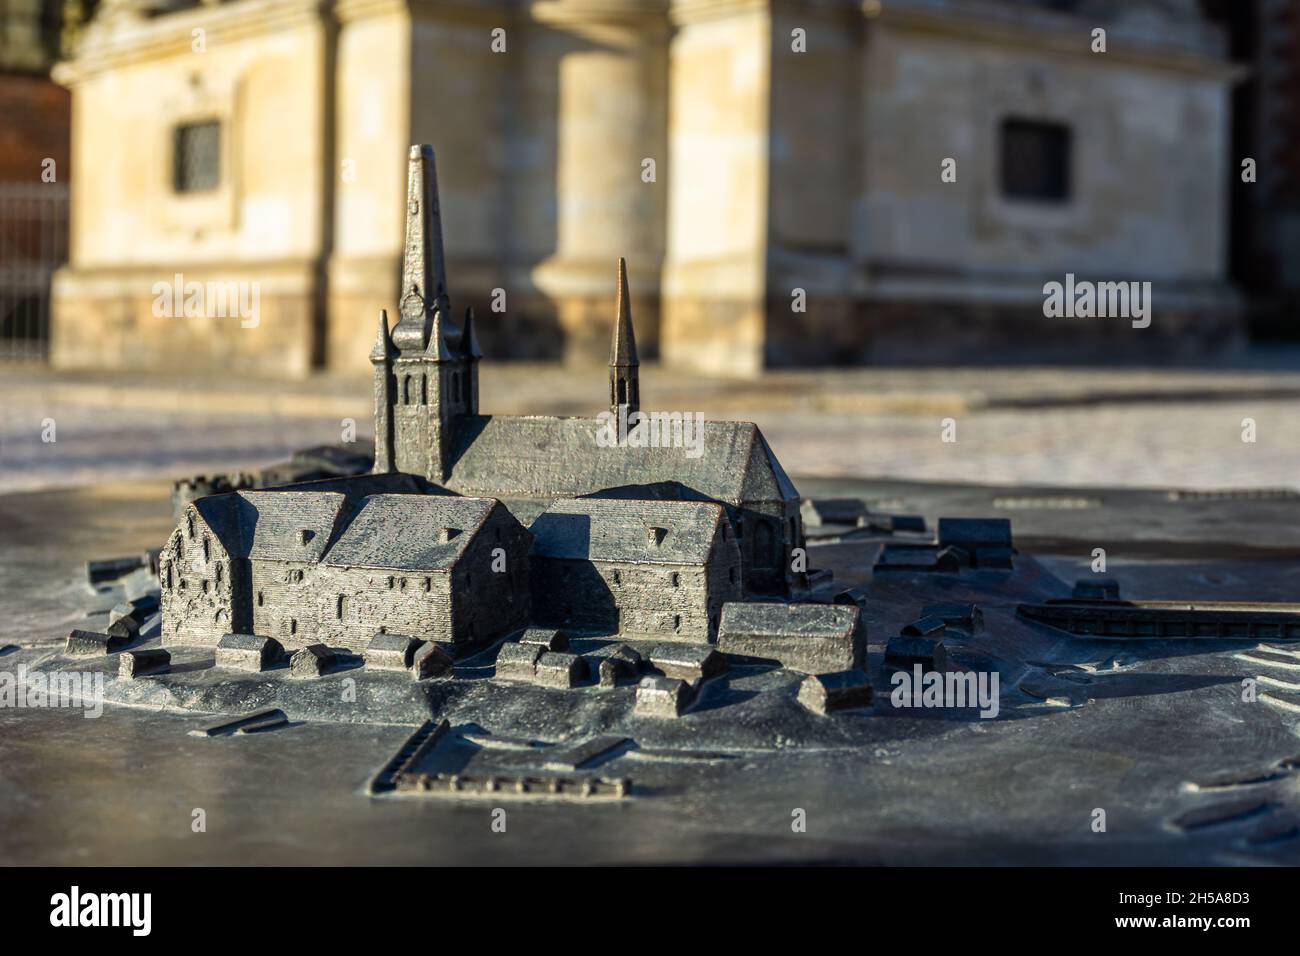 Stockholm, Sweden - April 3, 2021: Model of church and historical buildings on Riddarholmen in bronze and near the authentic cathedral where Swedish k Stock Photo